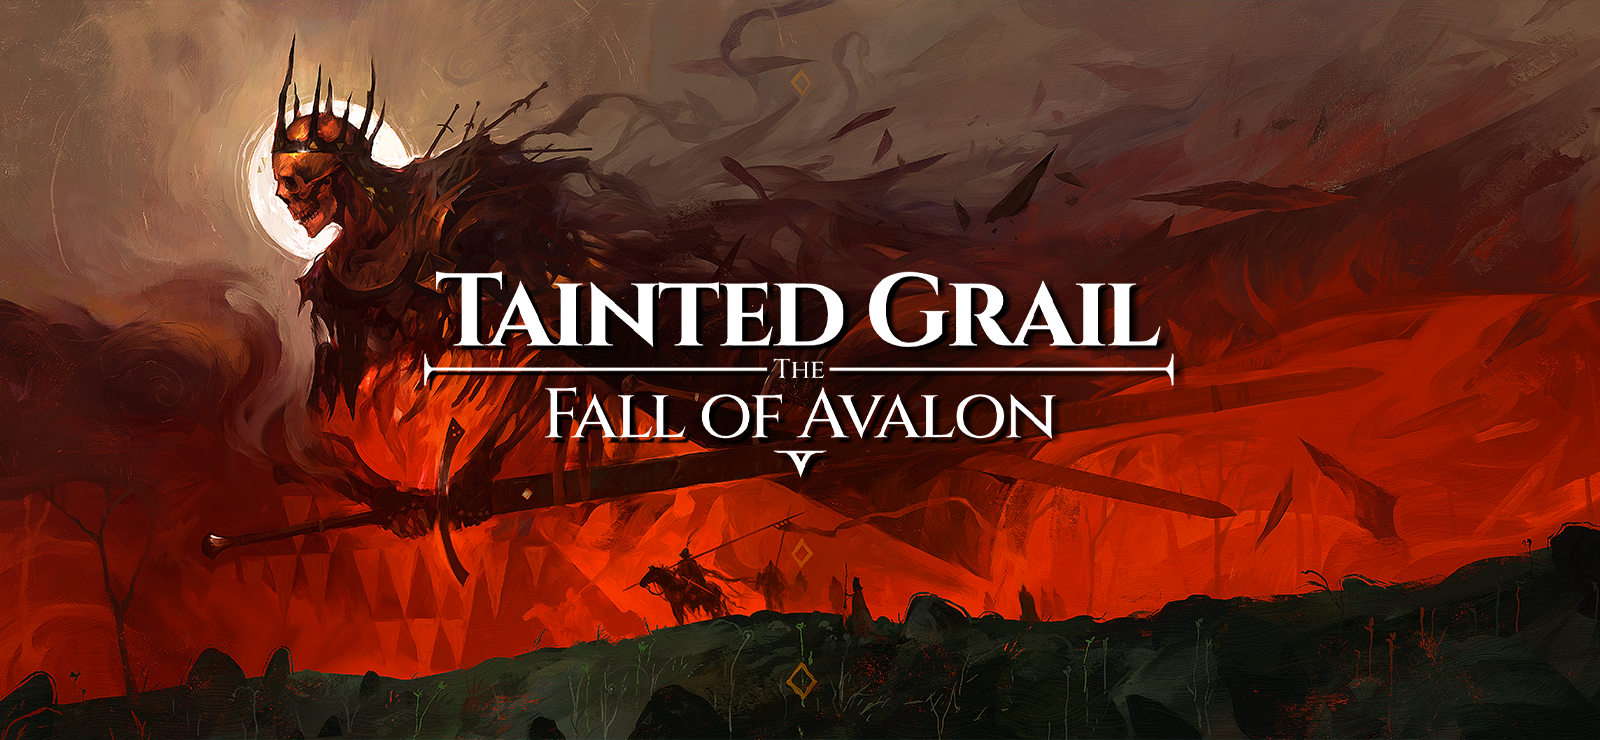 Tainted Grail: The Fall Of Avalon